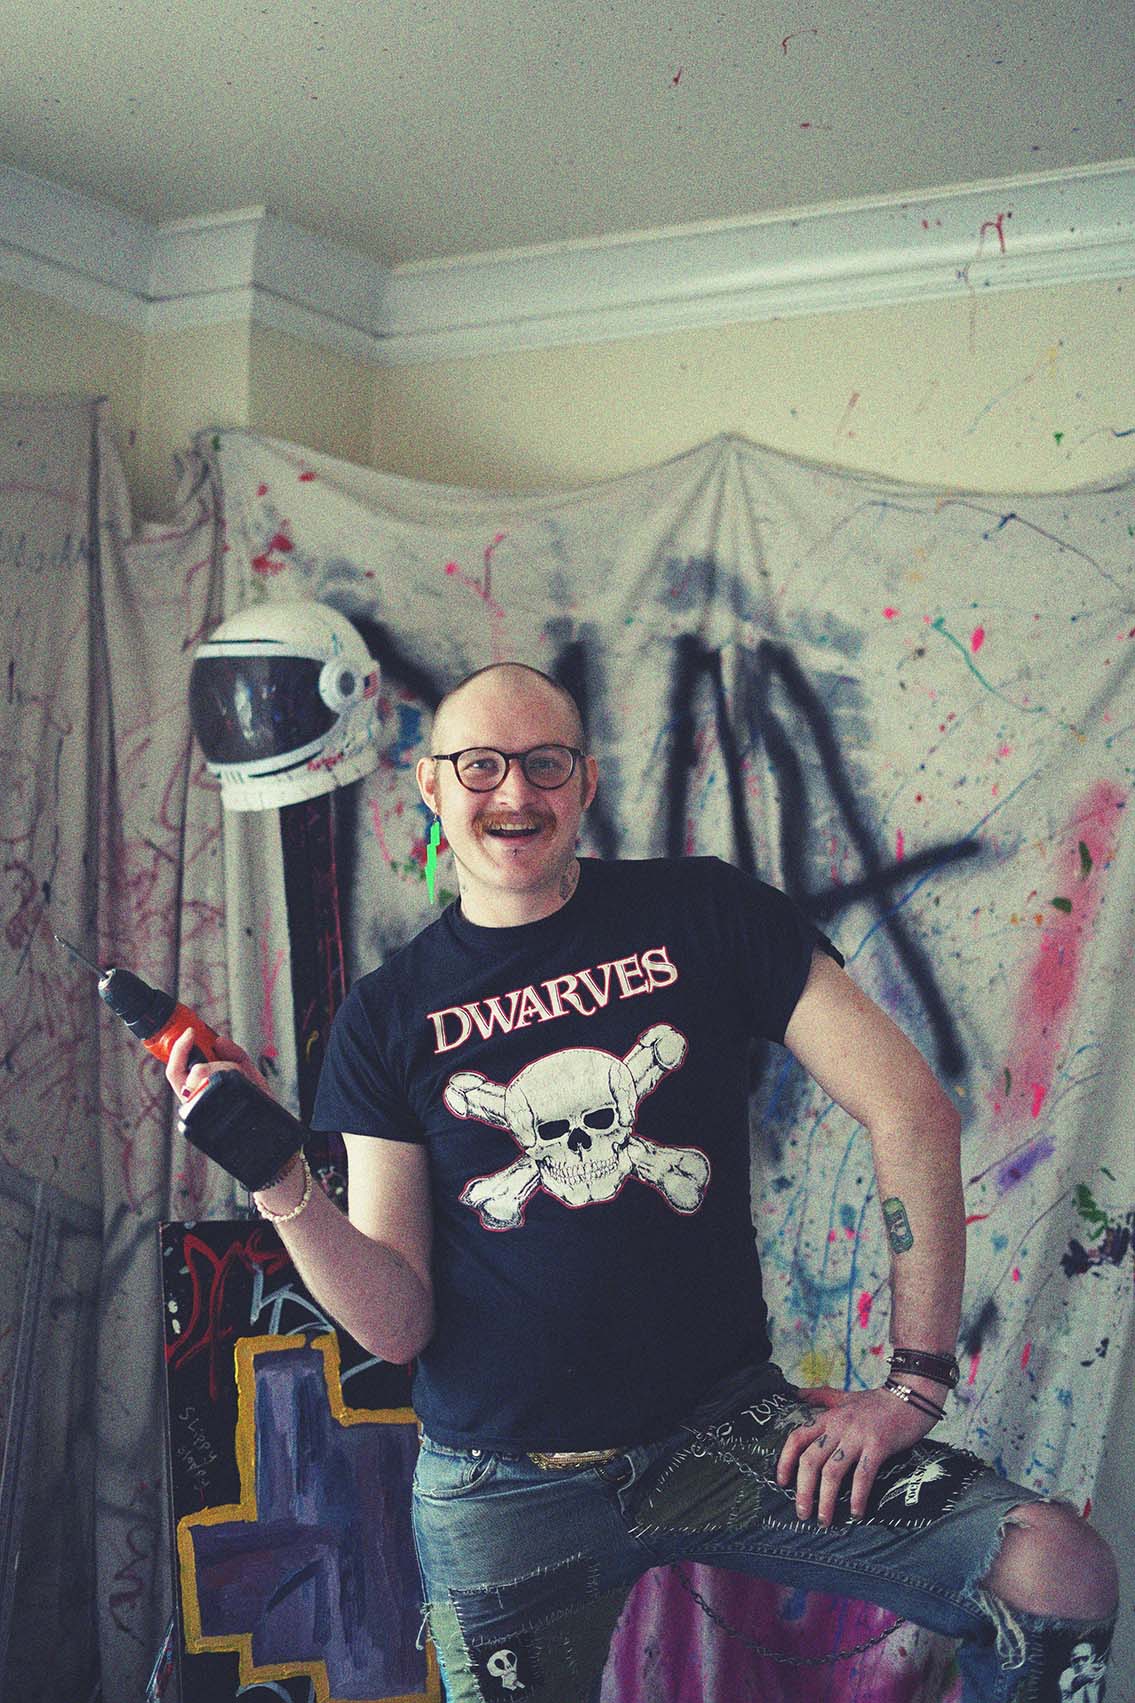 Artist with black t-shirt in their studio, holding a screwdriver